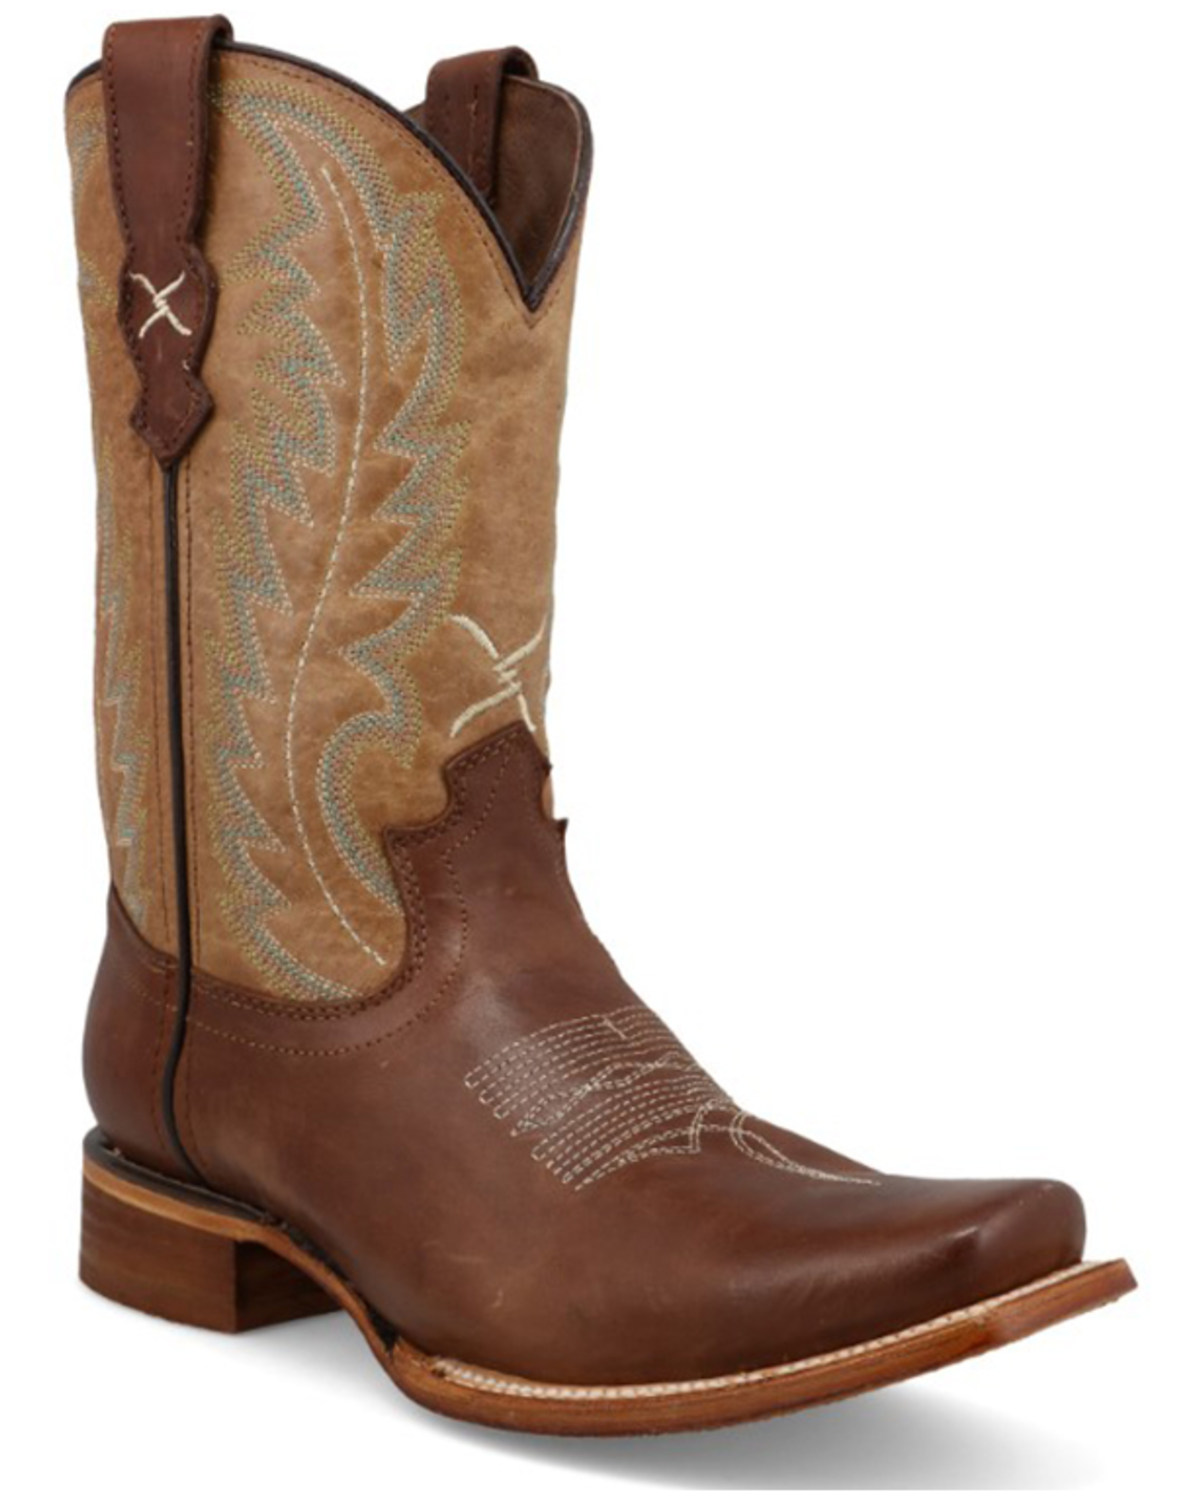 Twisted X Women's Rancher Western Boots - Square Toe